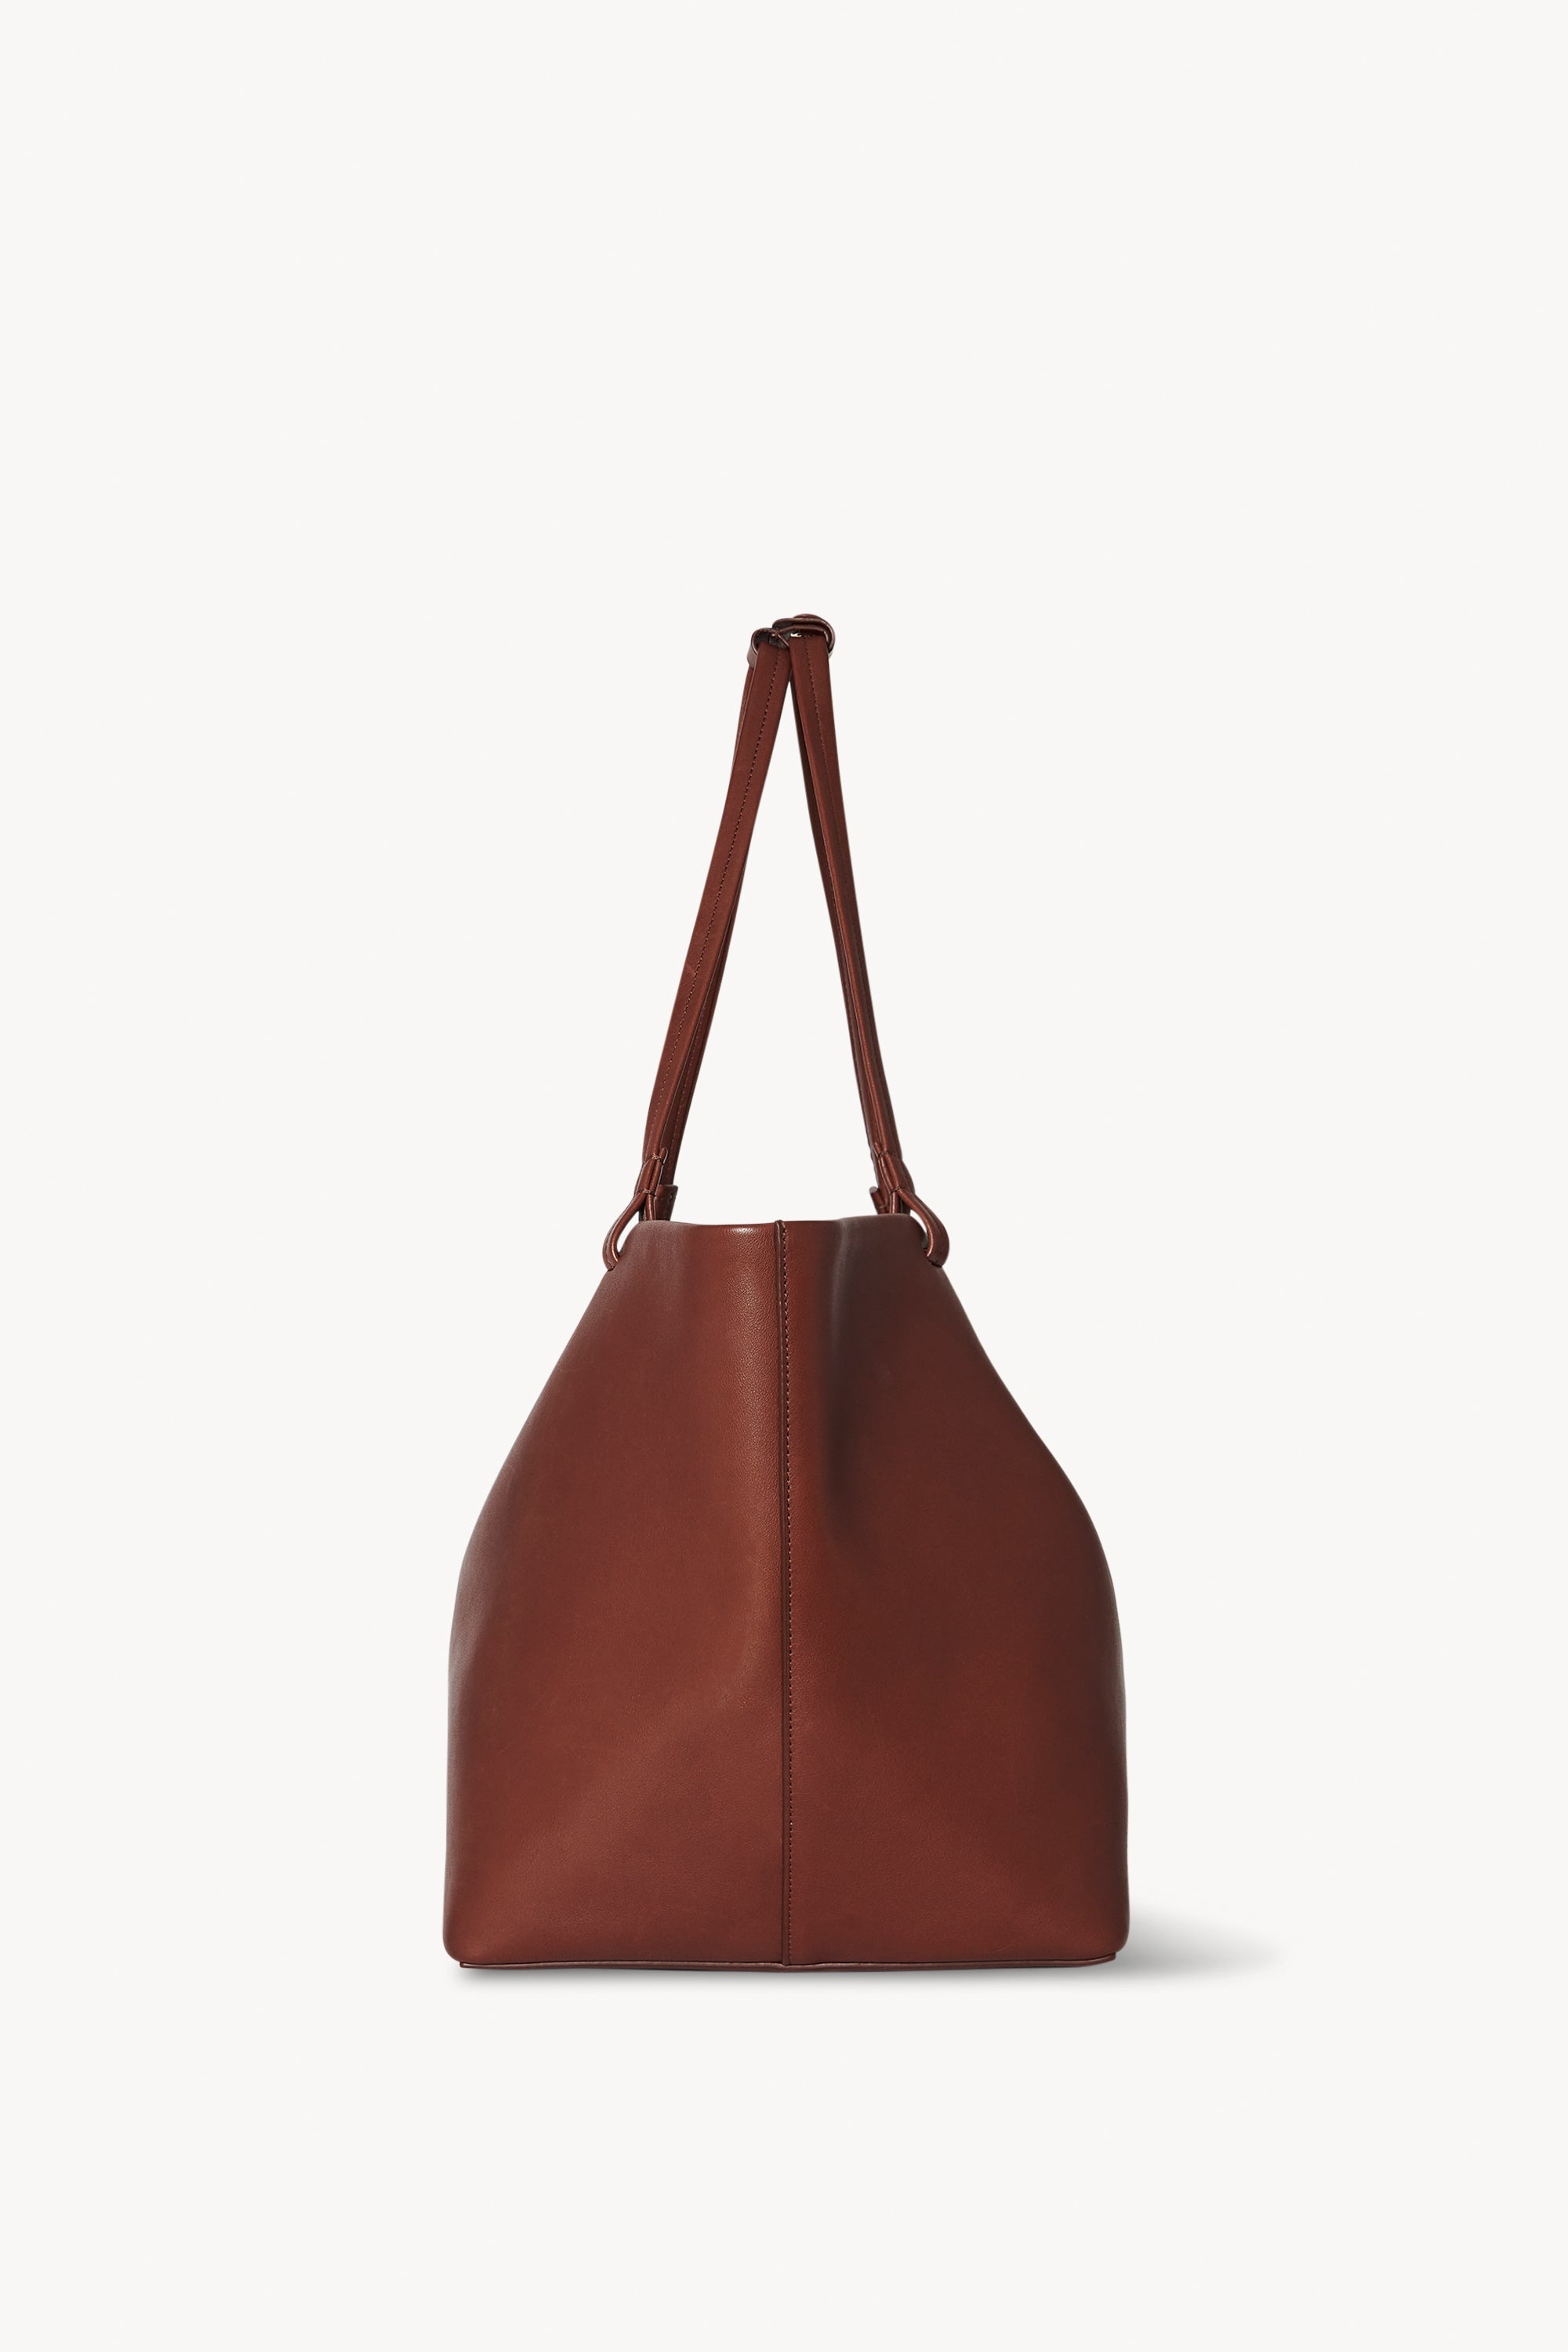 Park Tote Three Bag in Leather - 3